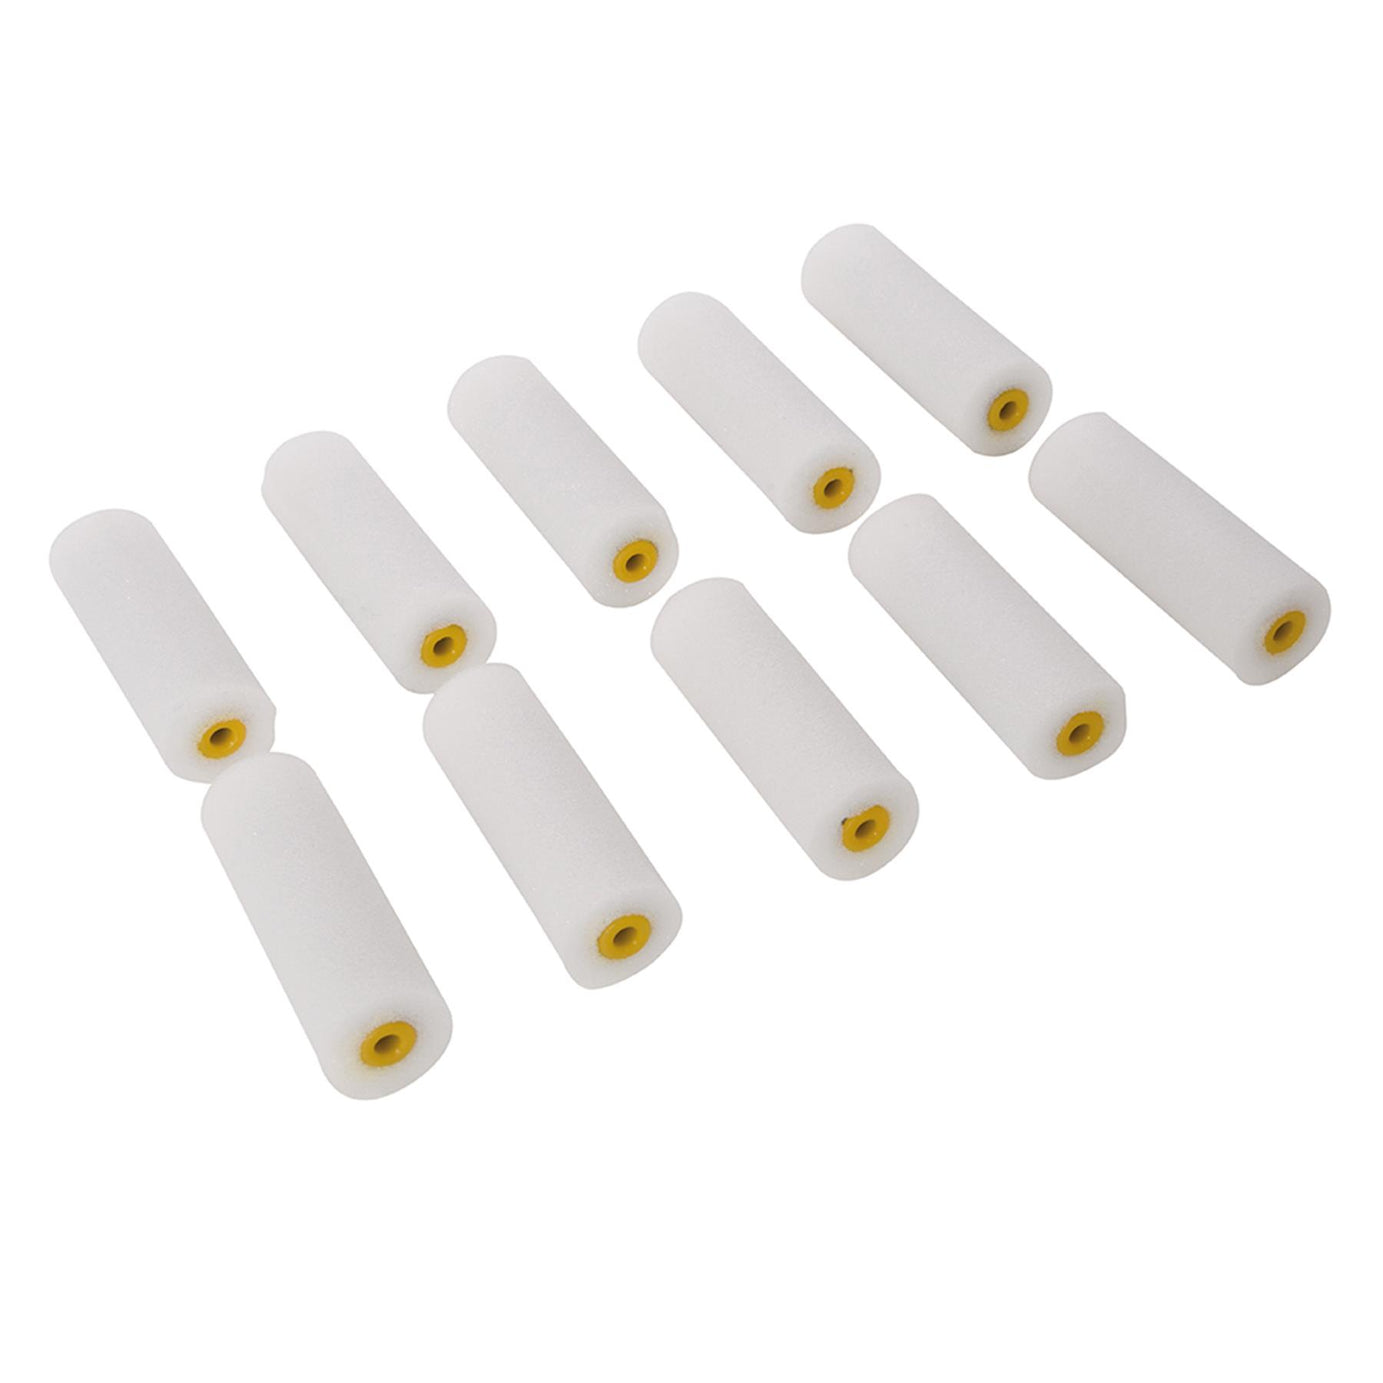 10Pk 100mm Mini Roller Sleeves Suitable For Use With Emulsion Or Gloss